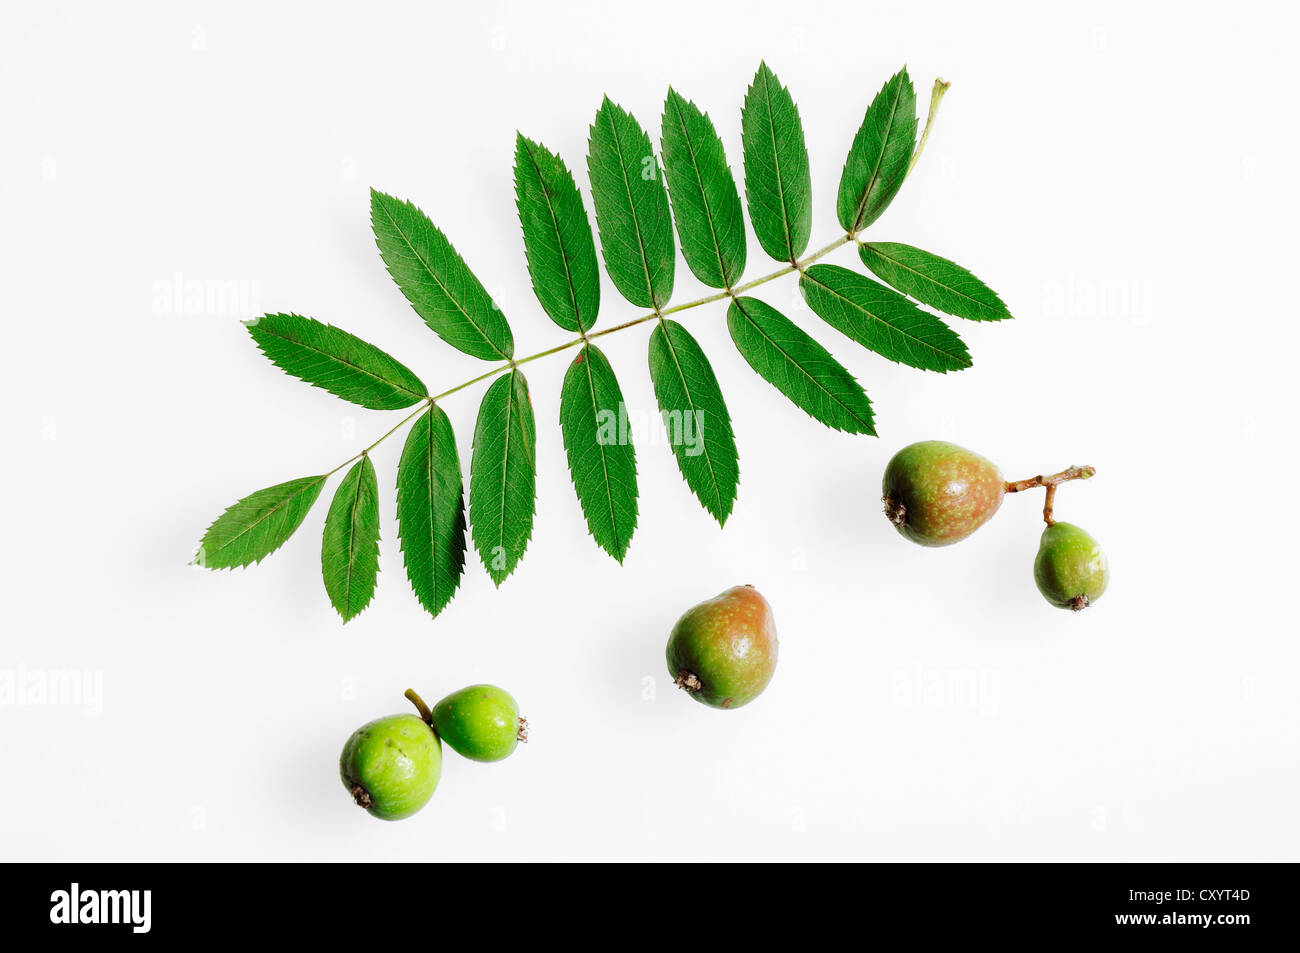 Service tree (Sorbus domestica), fruits and a leaf Stock Photo